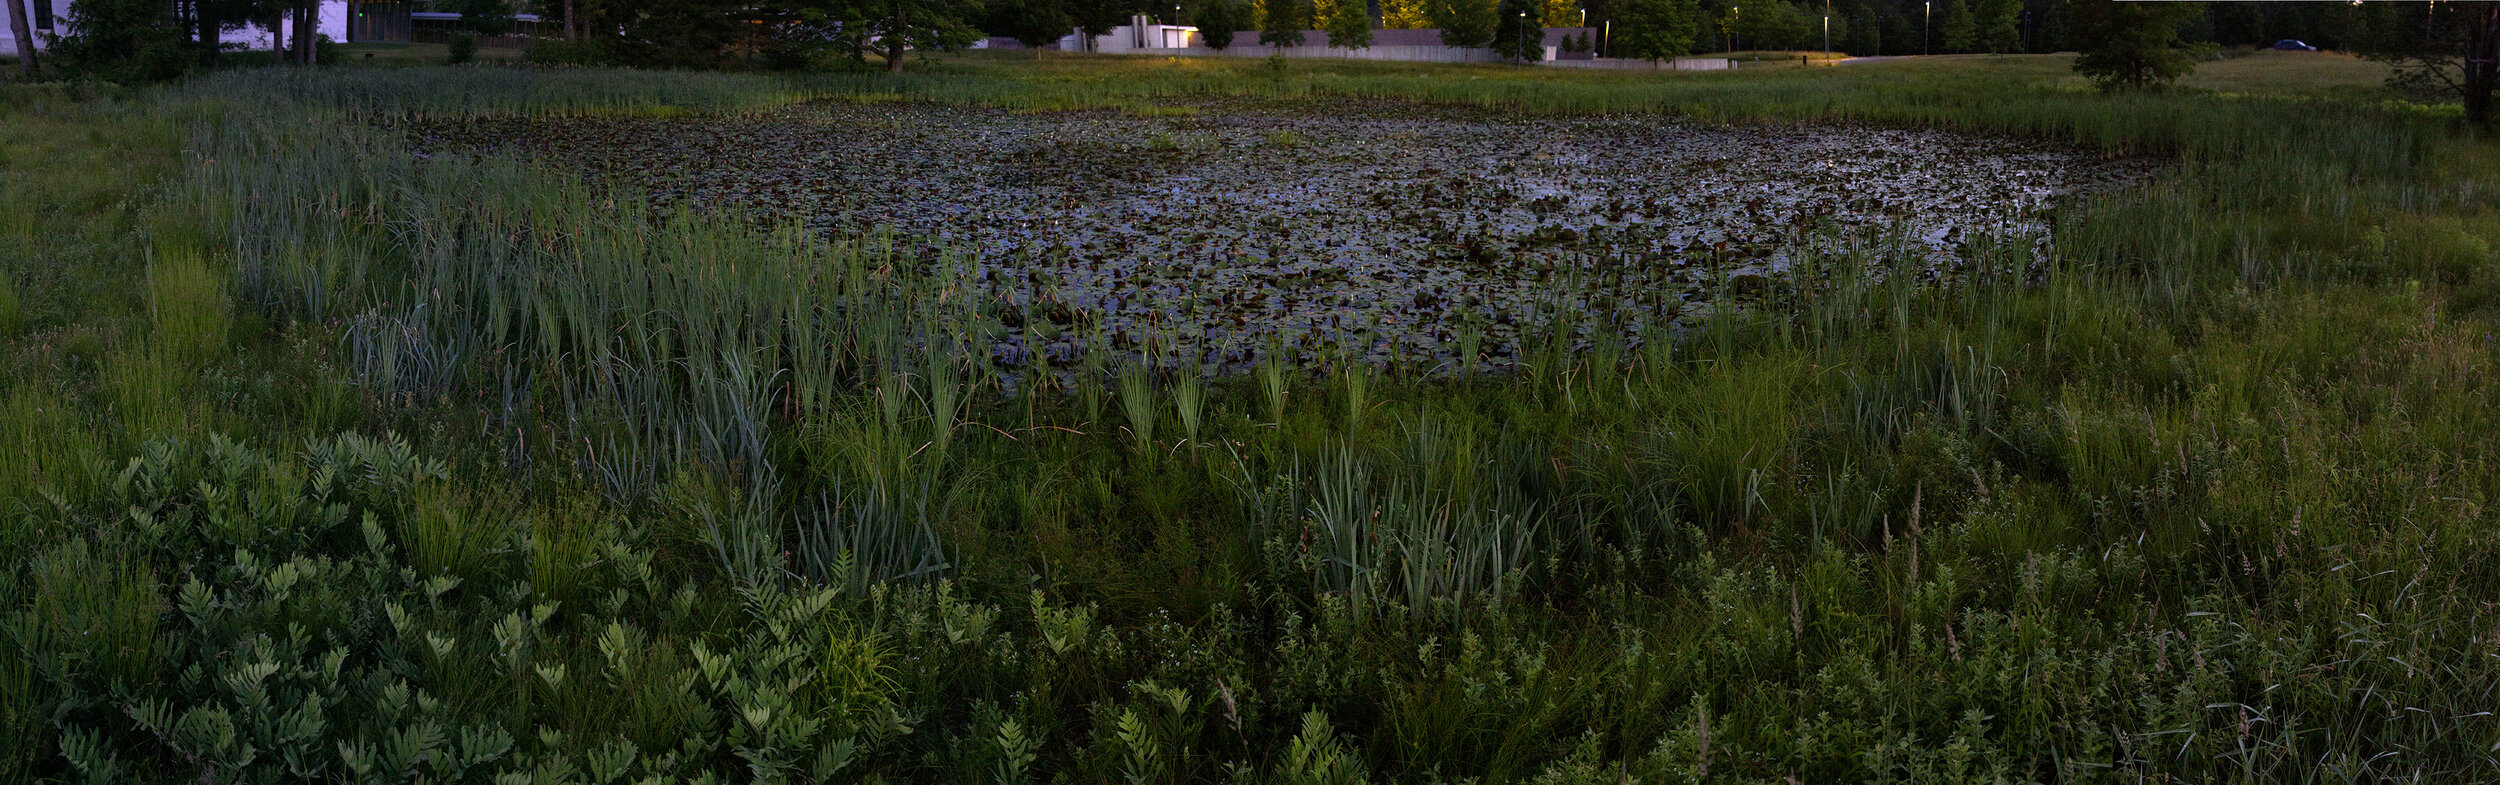 Stone Hill Lily Pond #7, Solstice Dawn